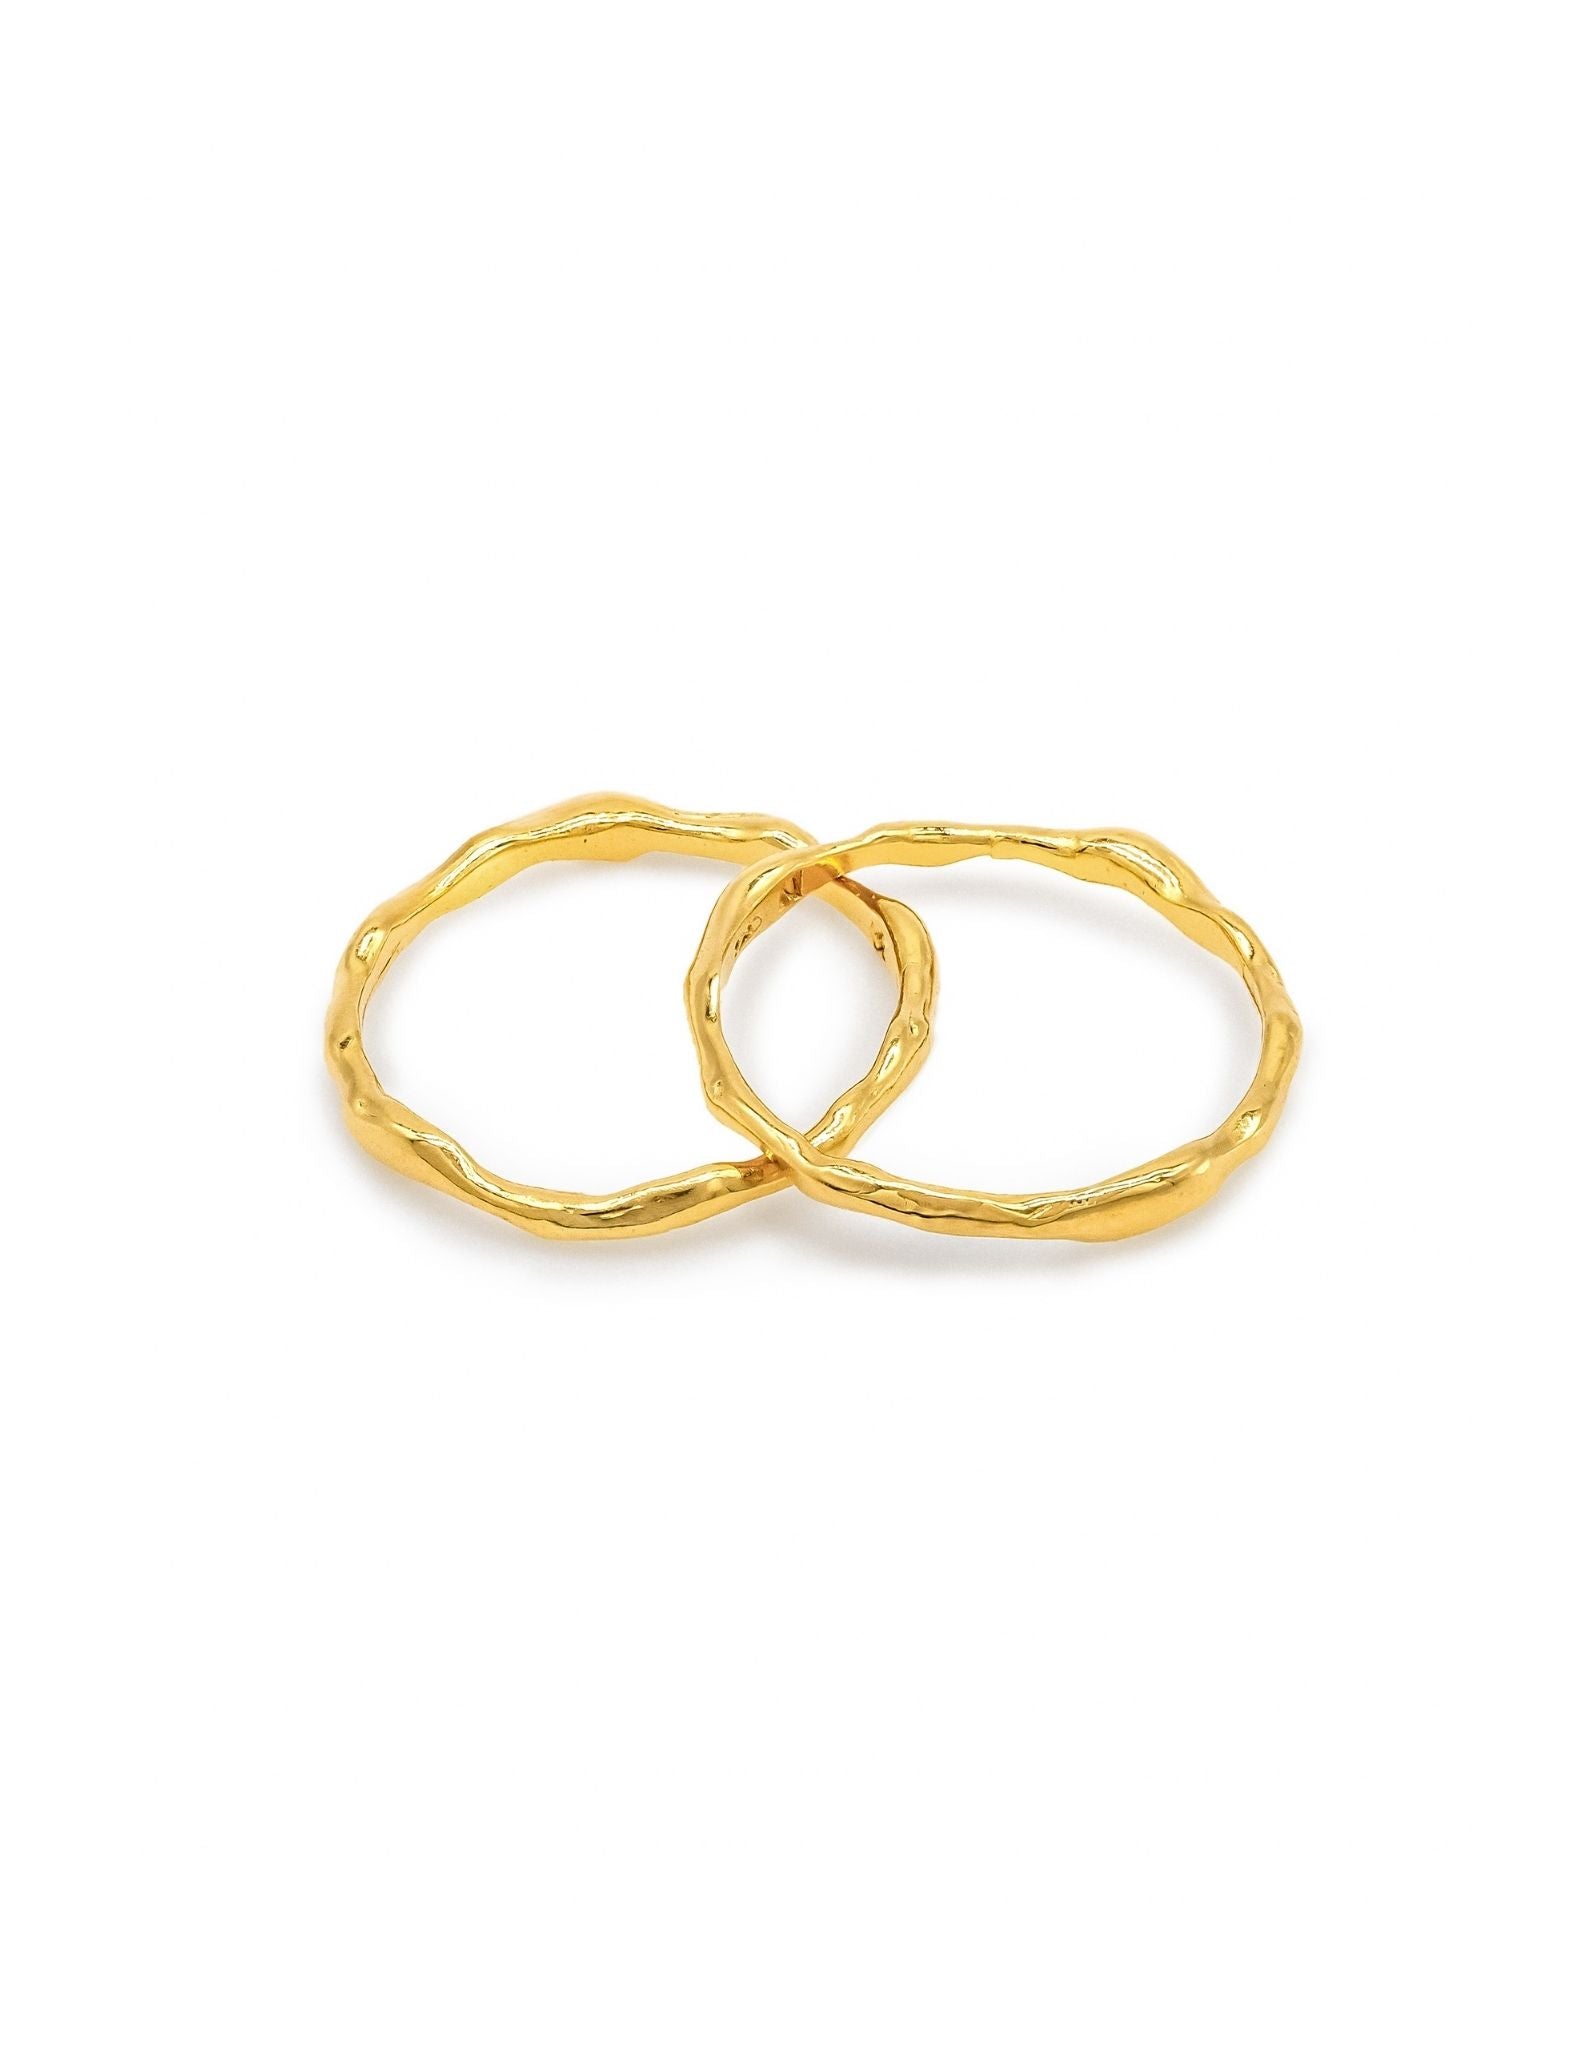 Kharys jewelry little finger and knuckle 18k gold vermeil stacking wave rings